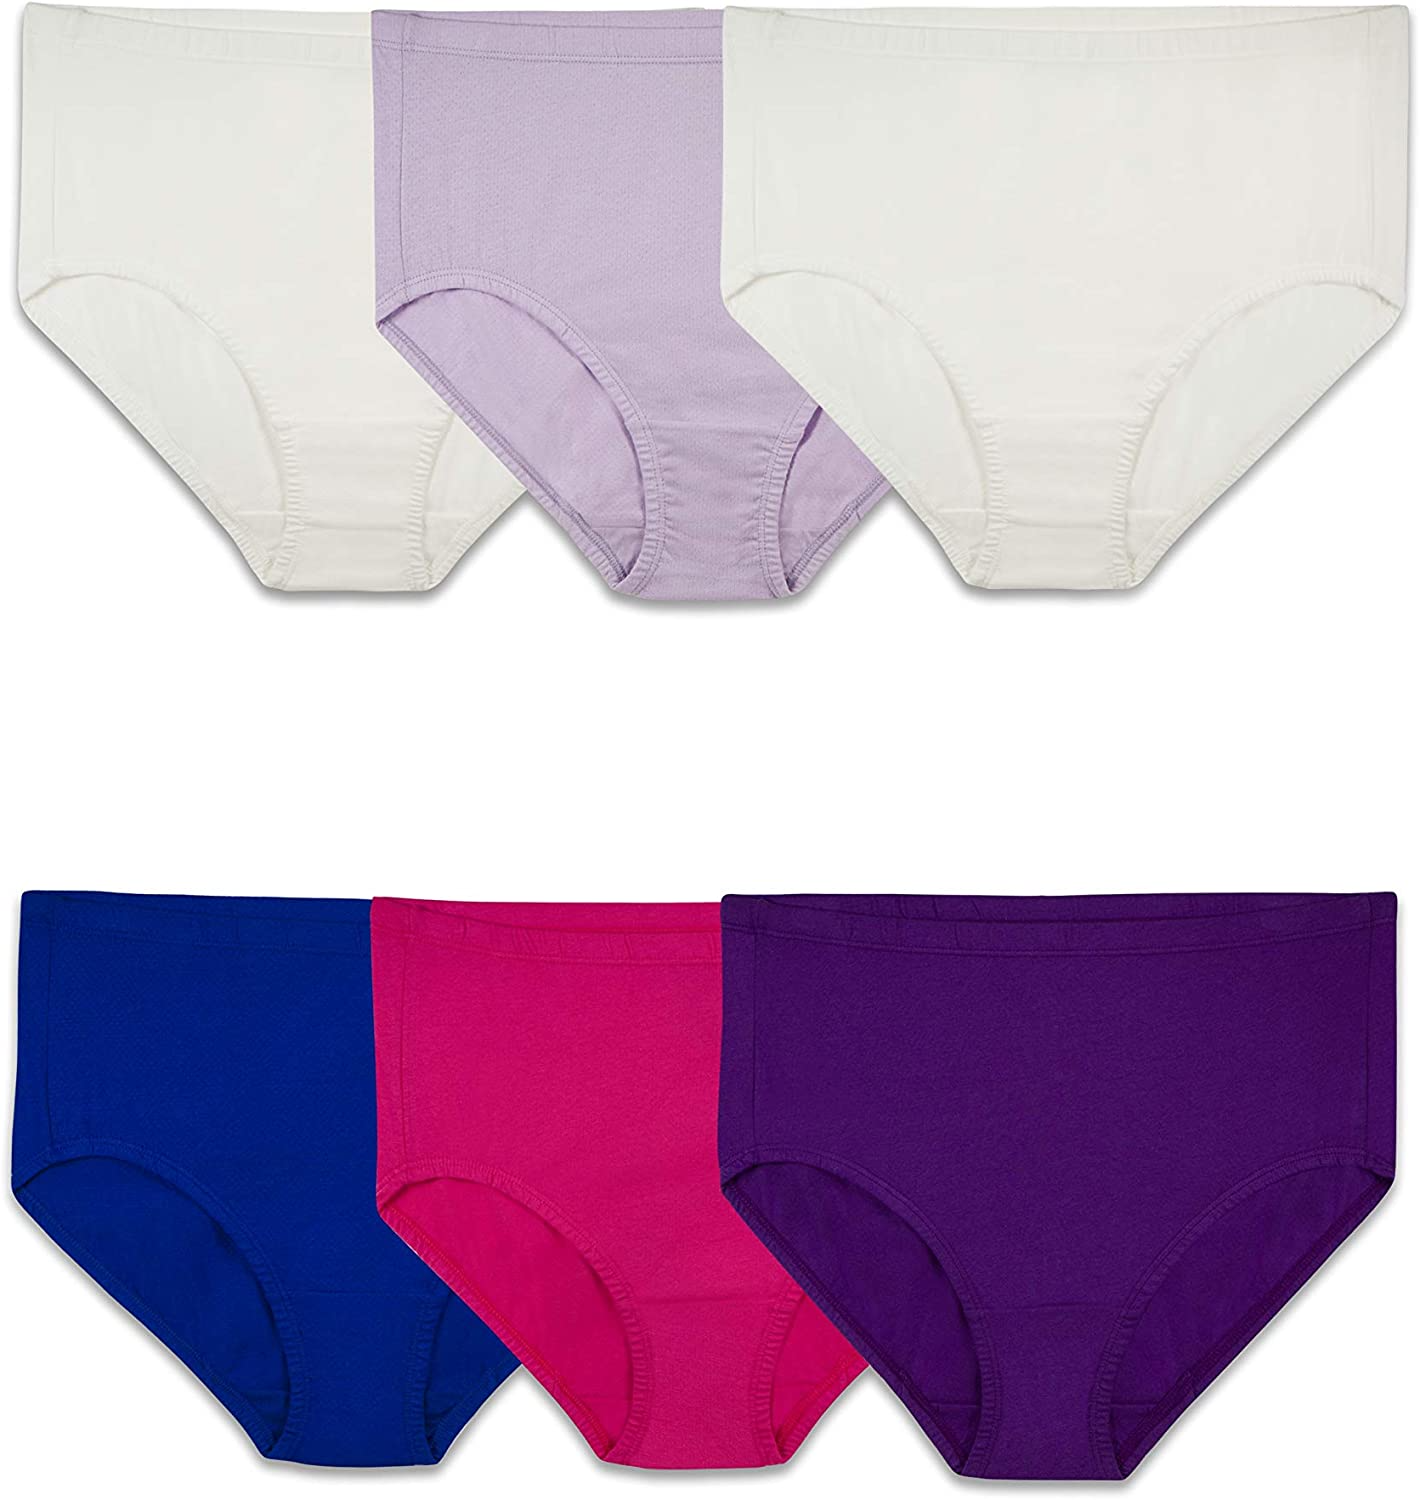 Fruit Of The Loom Fruit Of The Loom 5 Pairs Cotton Underwear Size